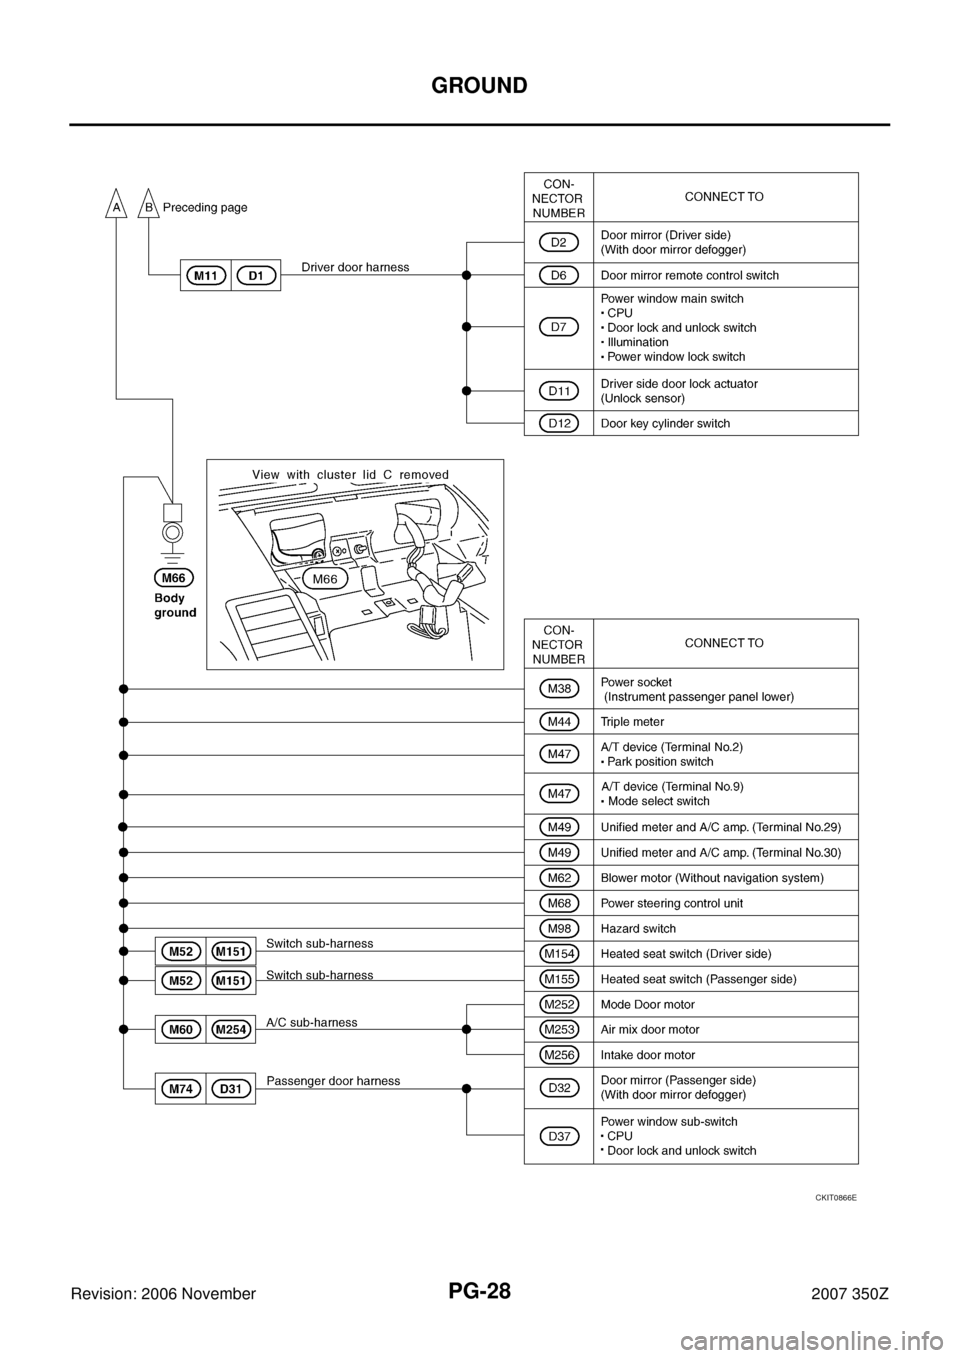 NISSAN 350Z 2007 Z33 Power Supply, Ground And Circuit Owners Manual PG-28
GROUND
Revision: 2006 November2007 350Z
CKIT0866E 